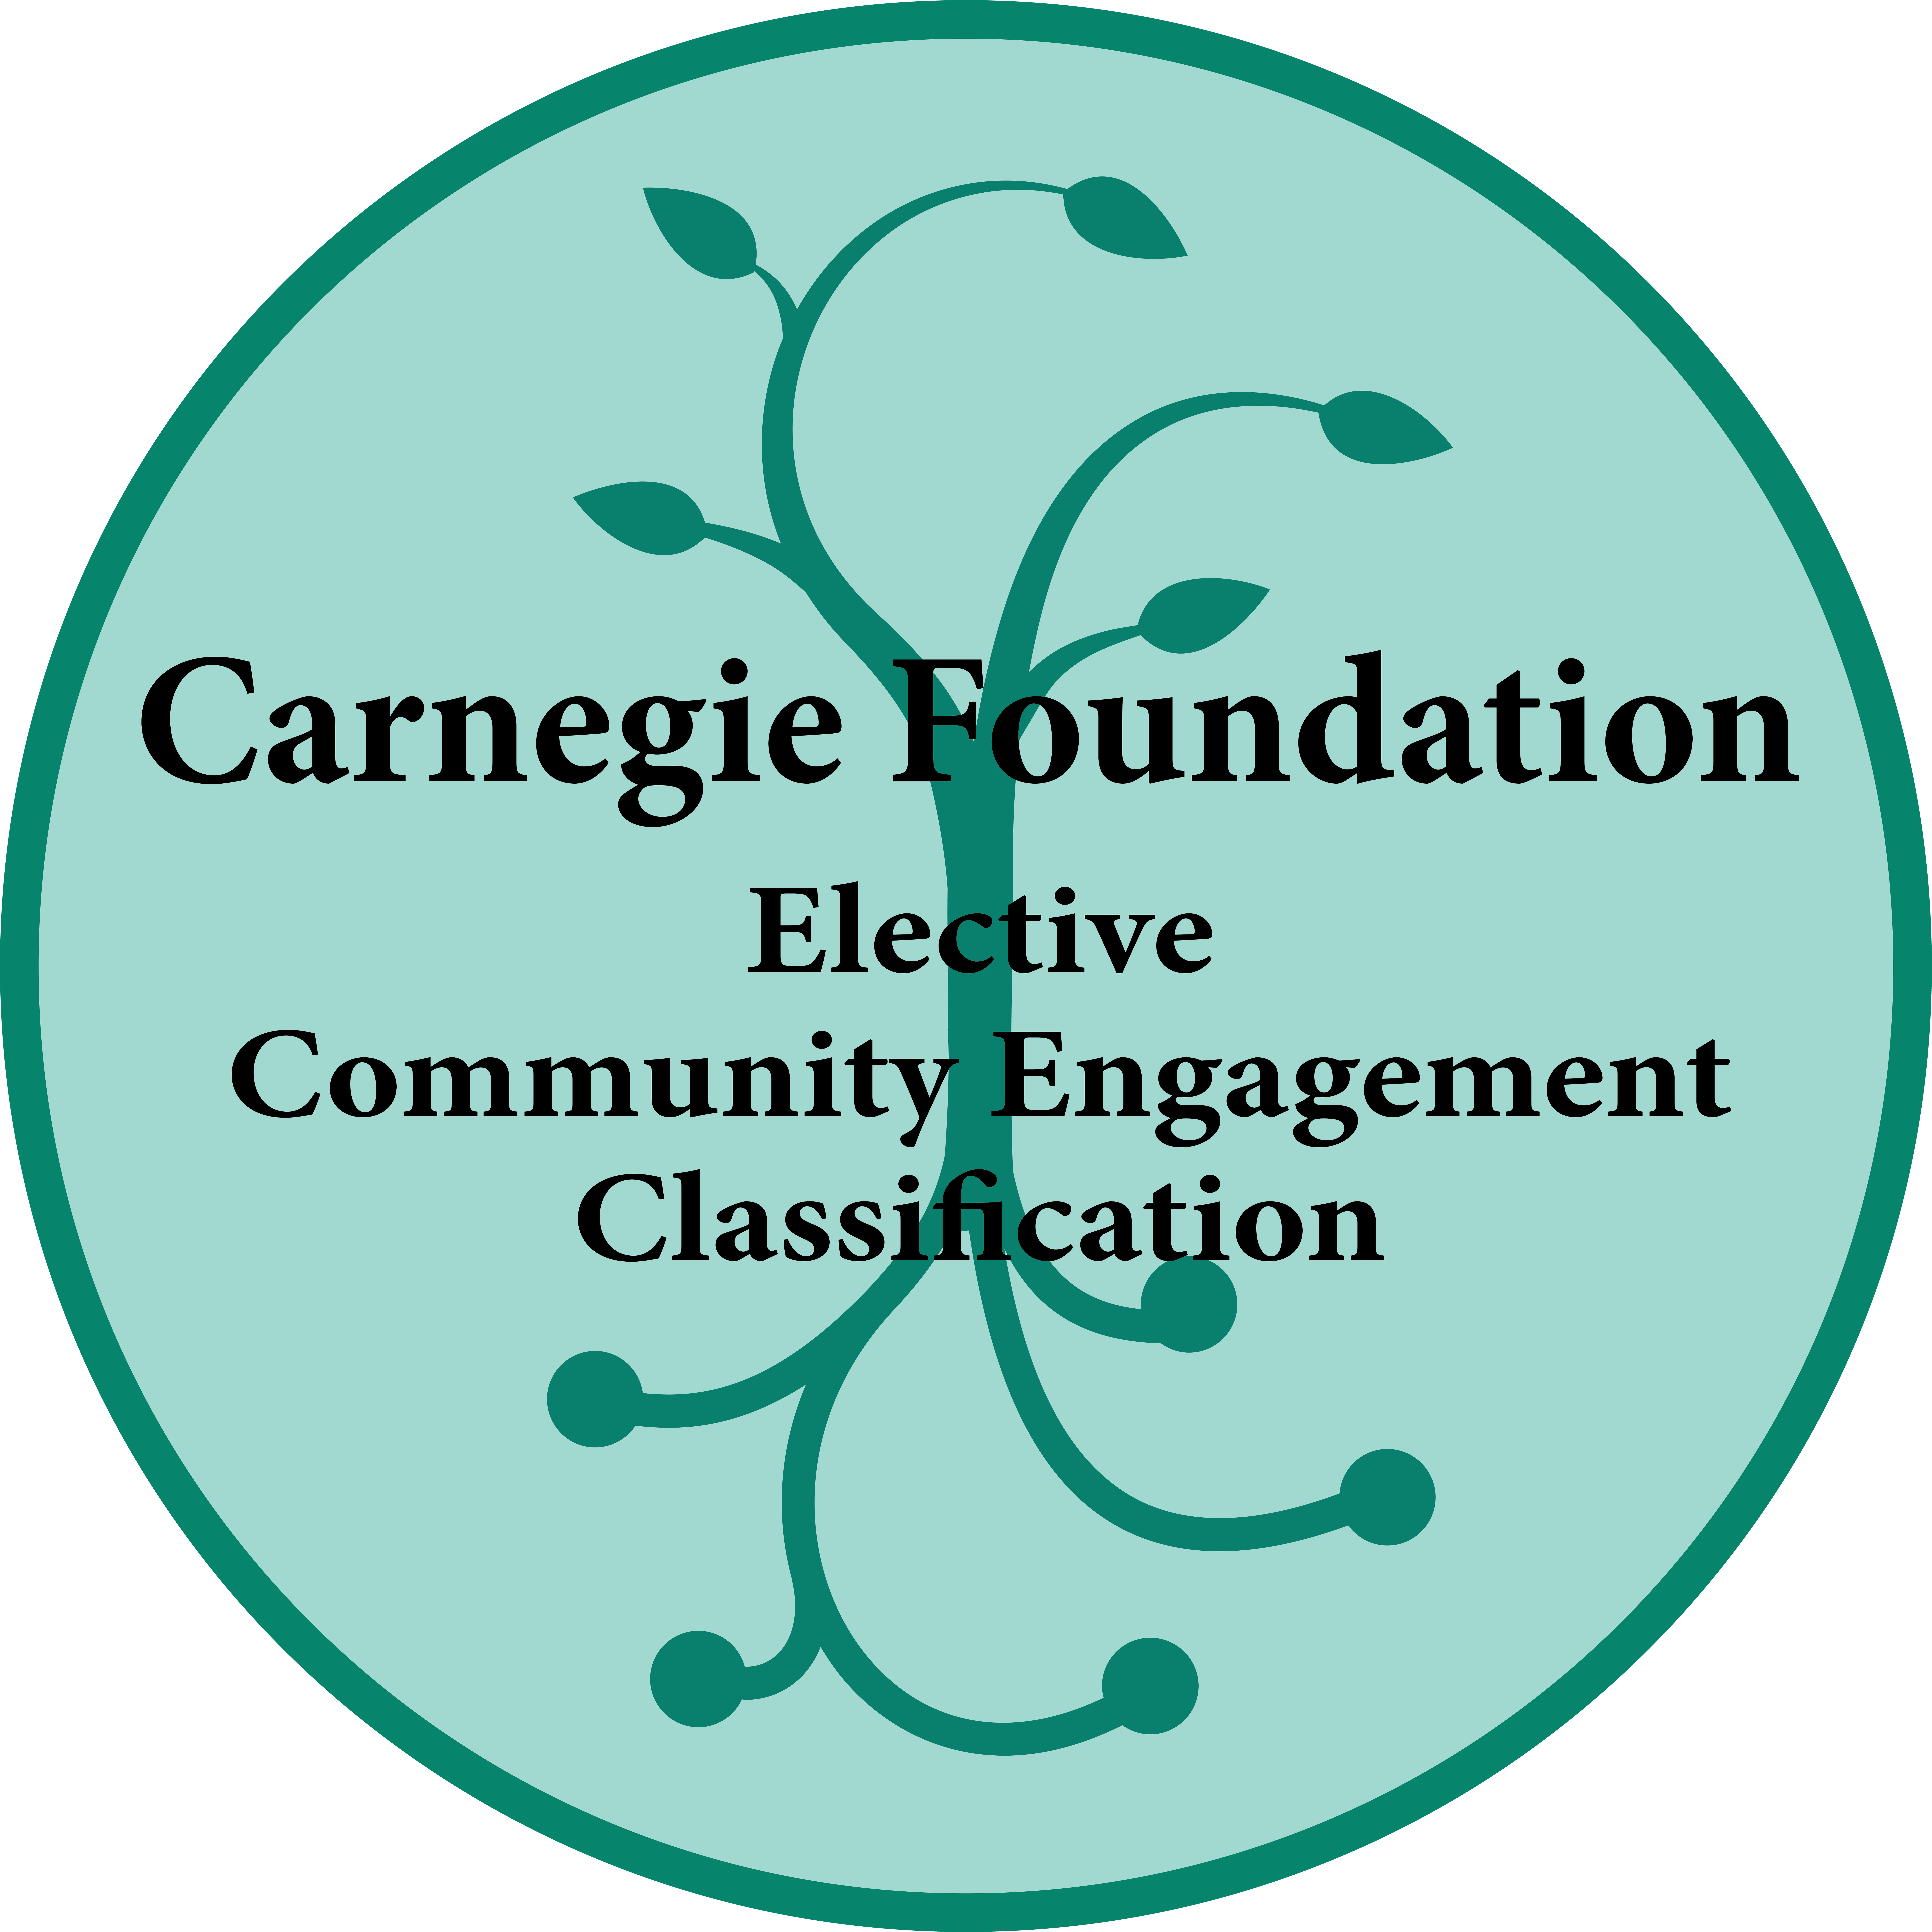 About the Carnegie Classification